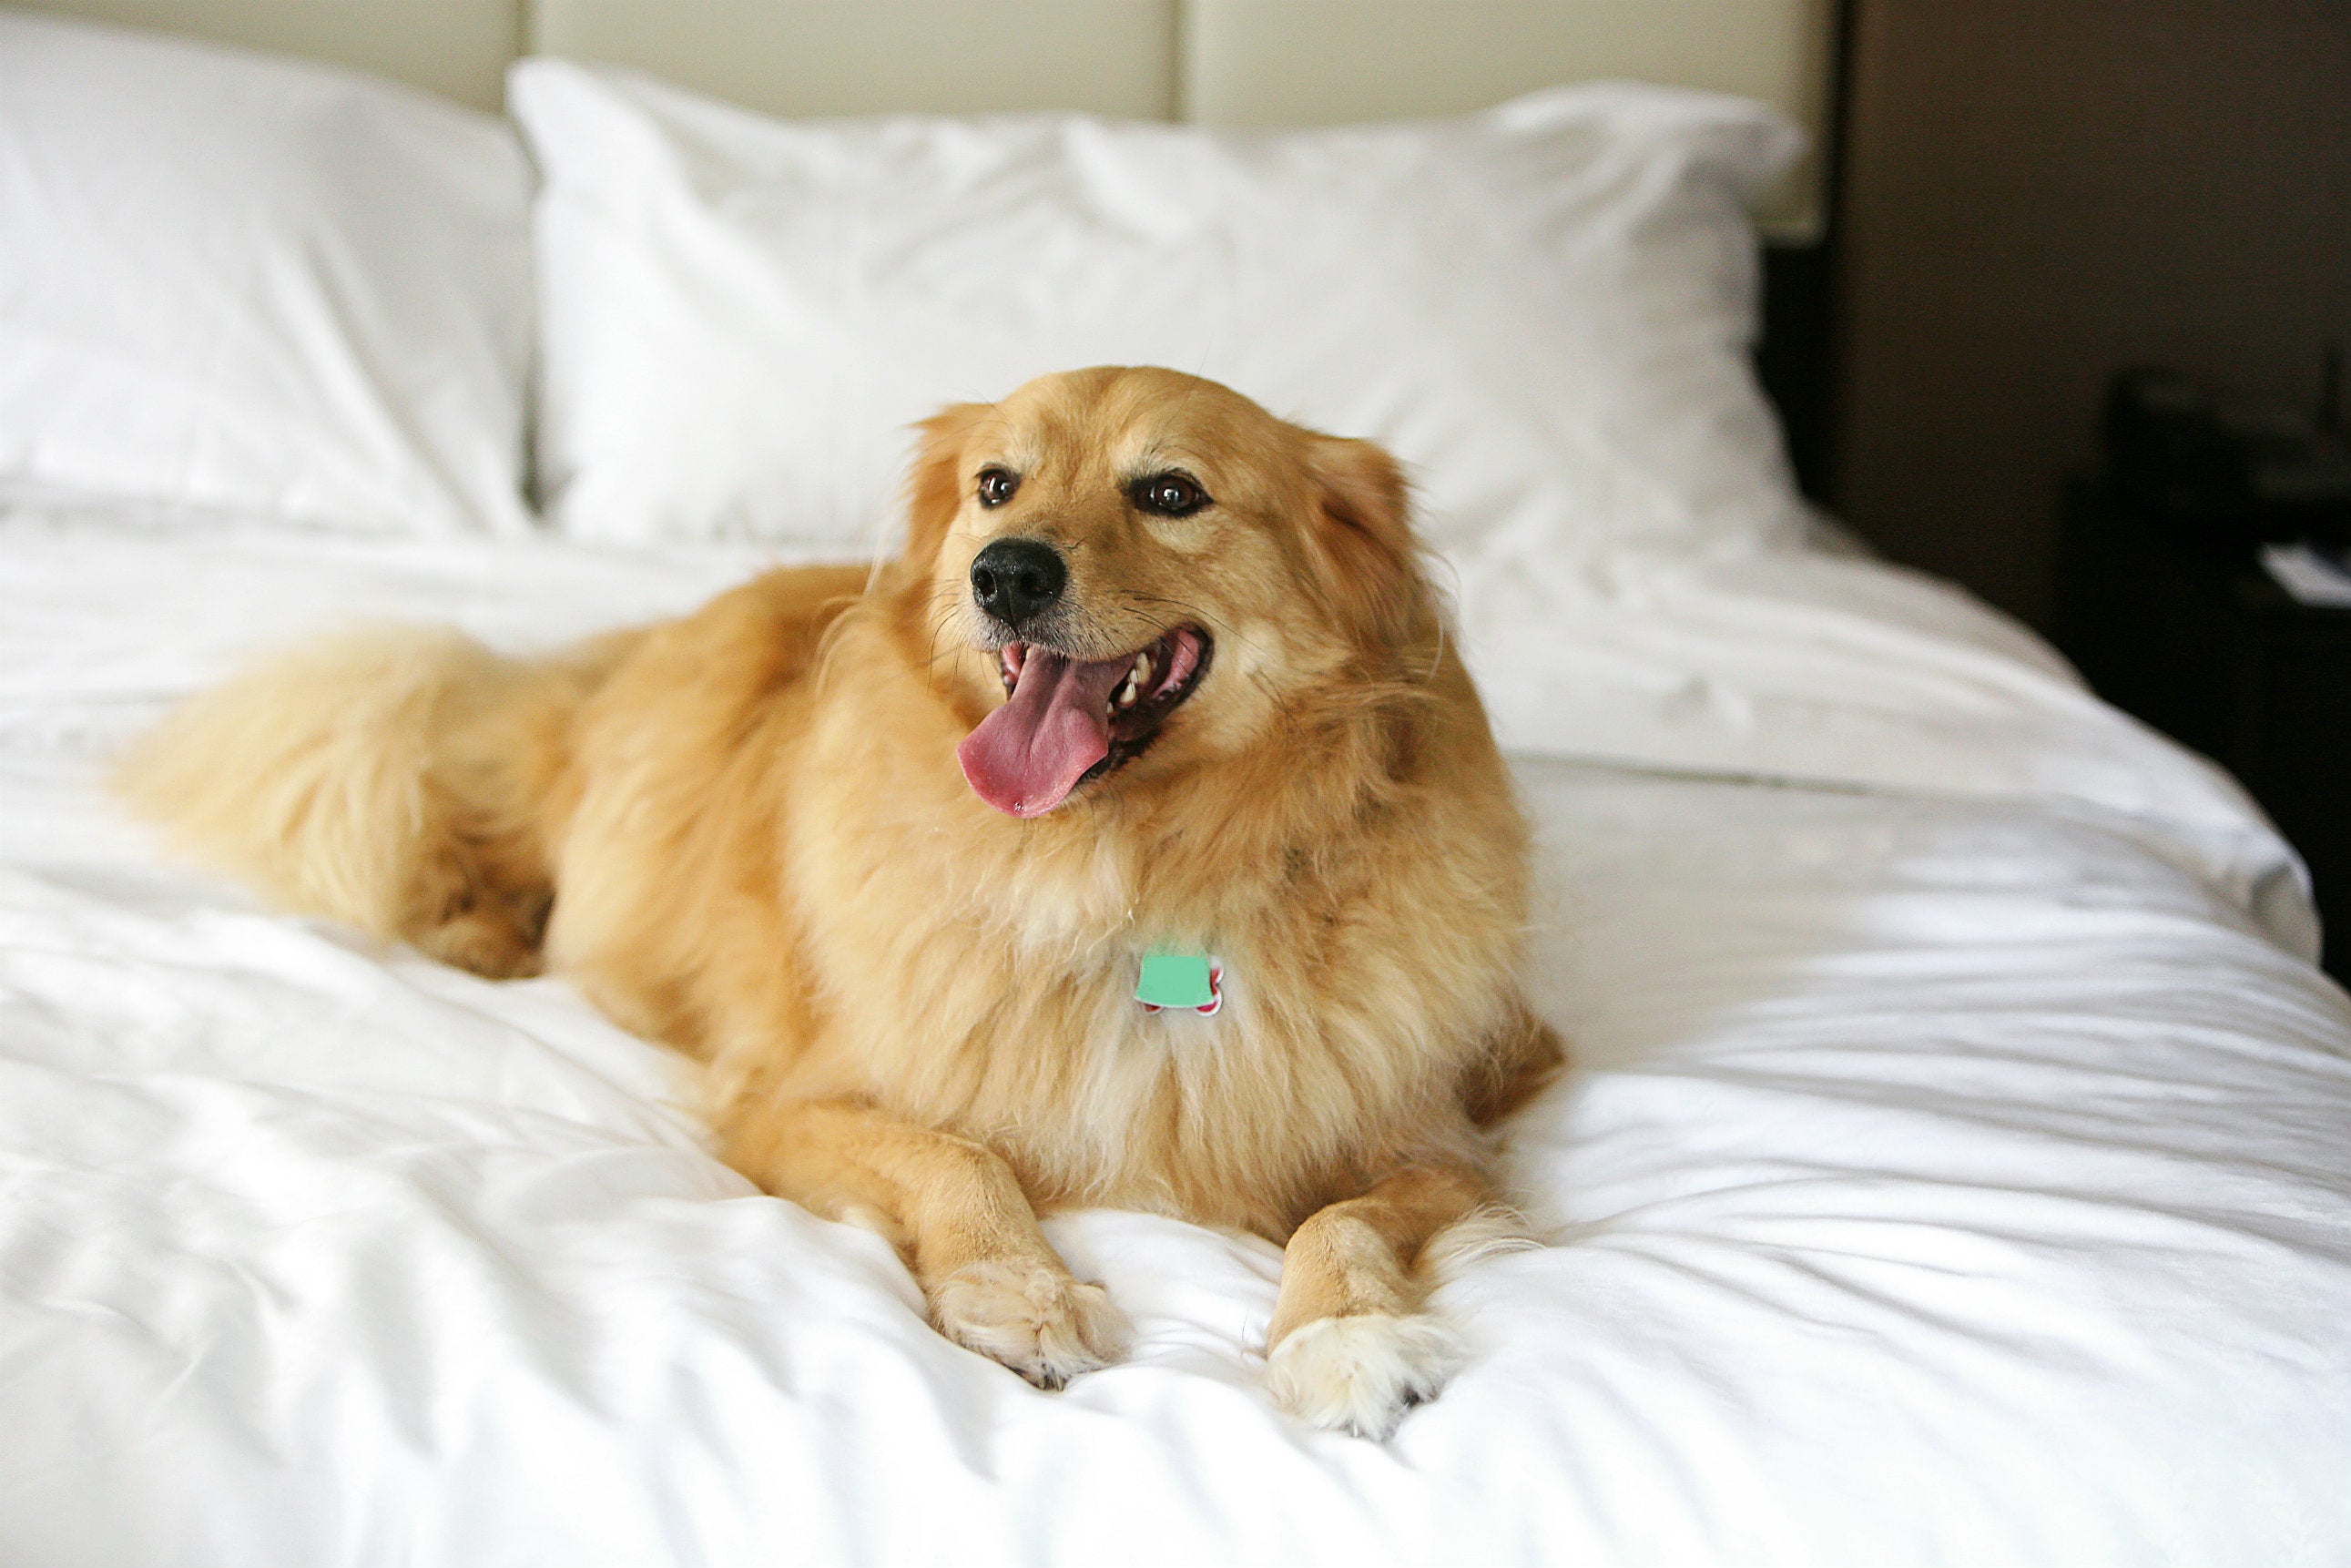 Who says Fido can't get the royal treatment while you're on vacation?